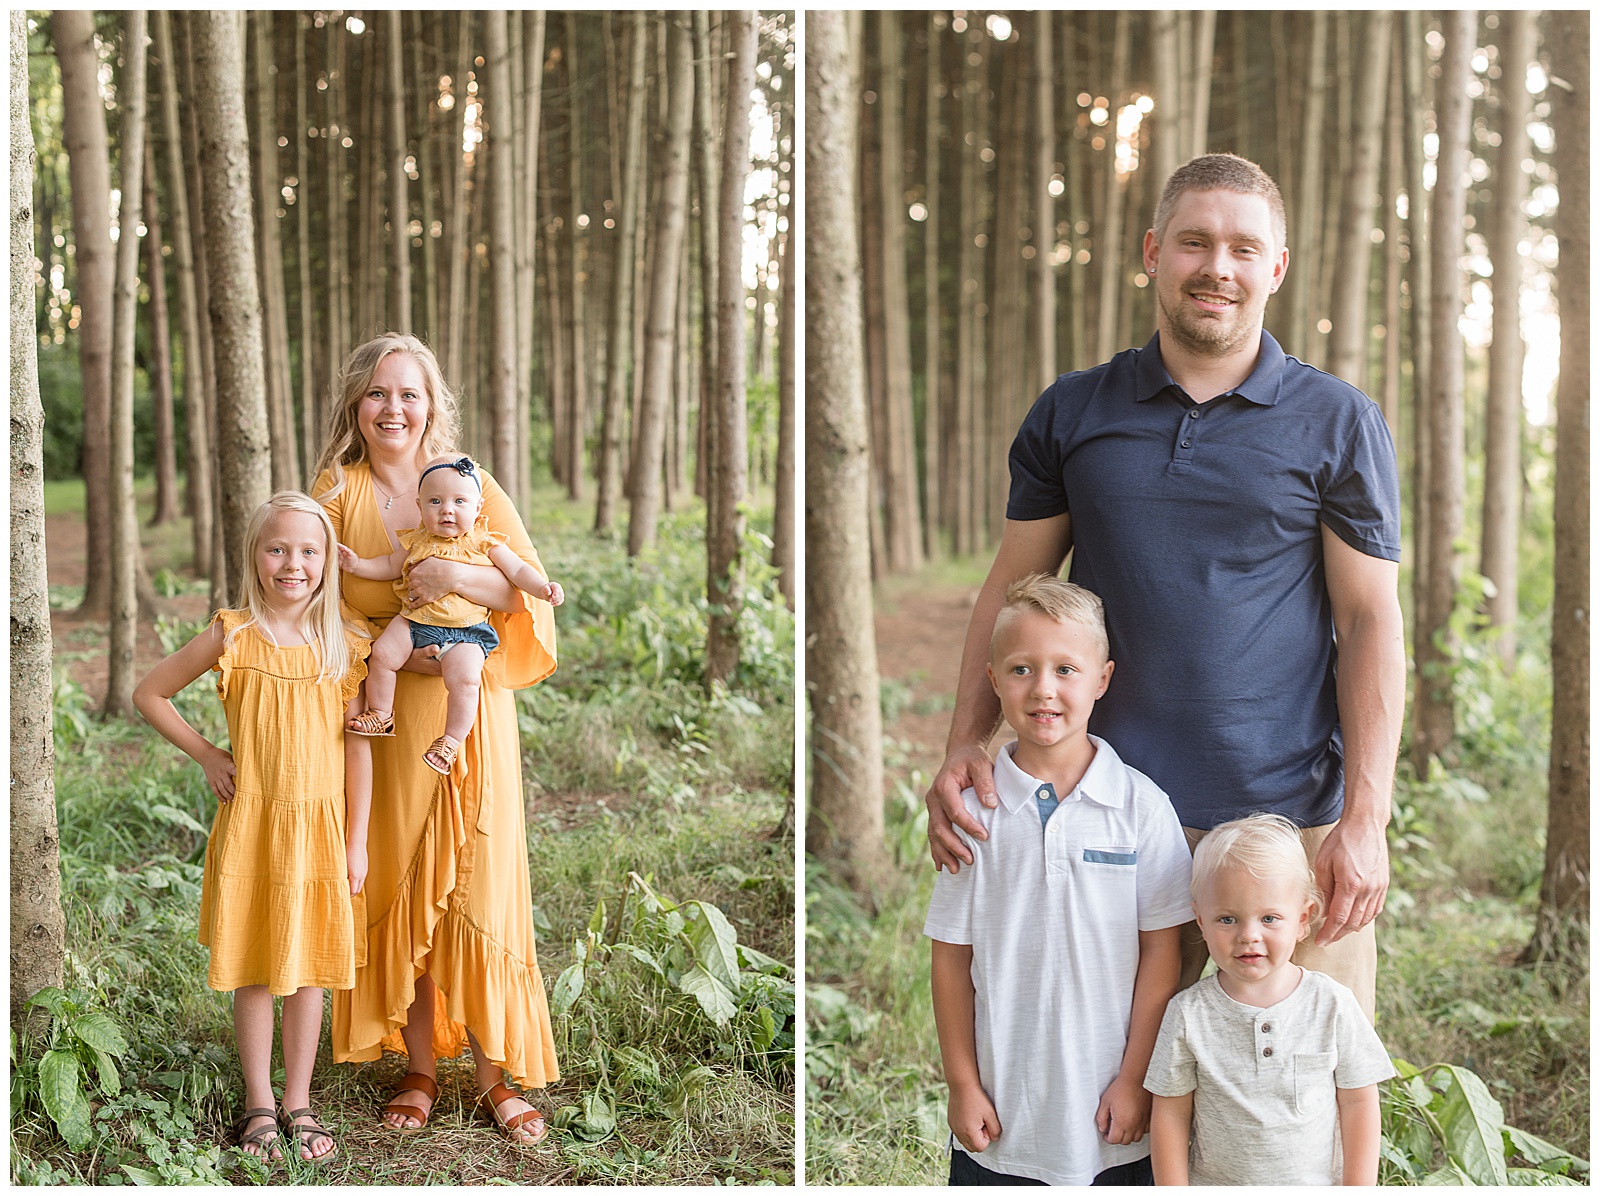 woman with her two small girls and man with his two small boys all smiling in pine tree grove